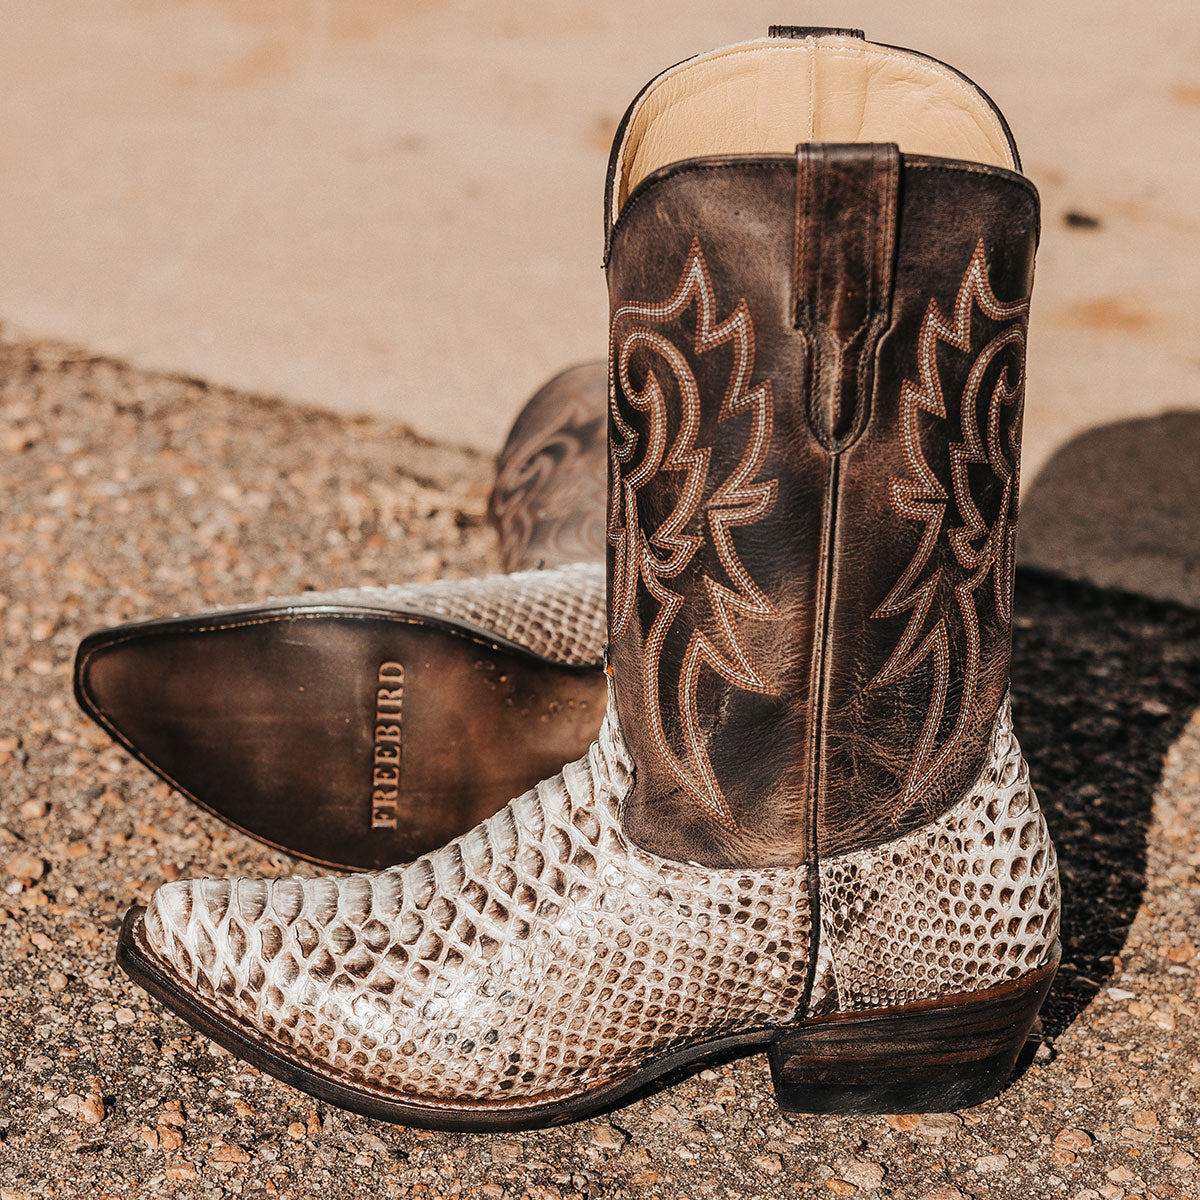 FREEBIRD men's Marshall grey python leather western cowboy boot with shaft stitch detailing, snip toe construction and leather pull straps